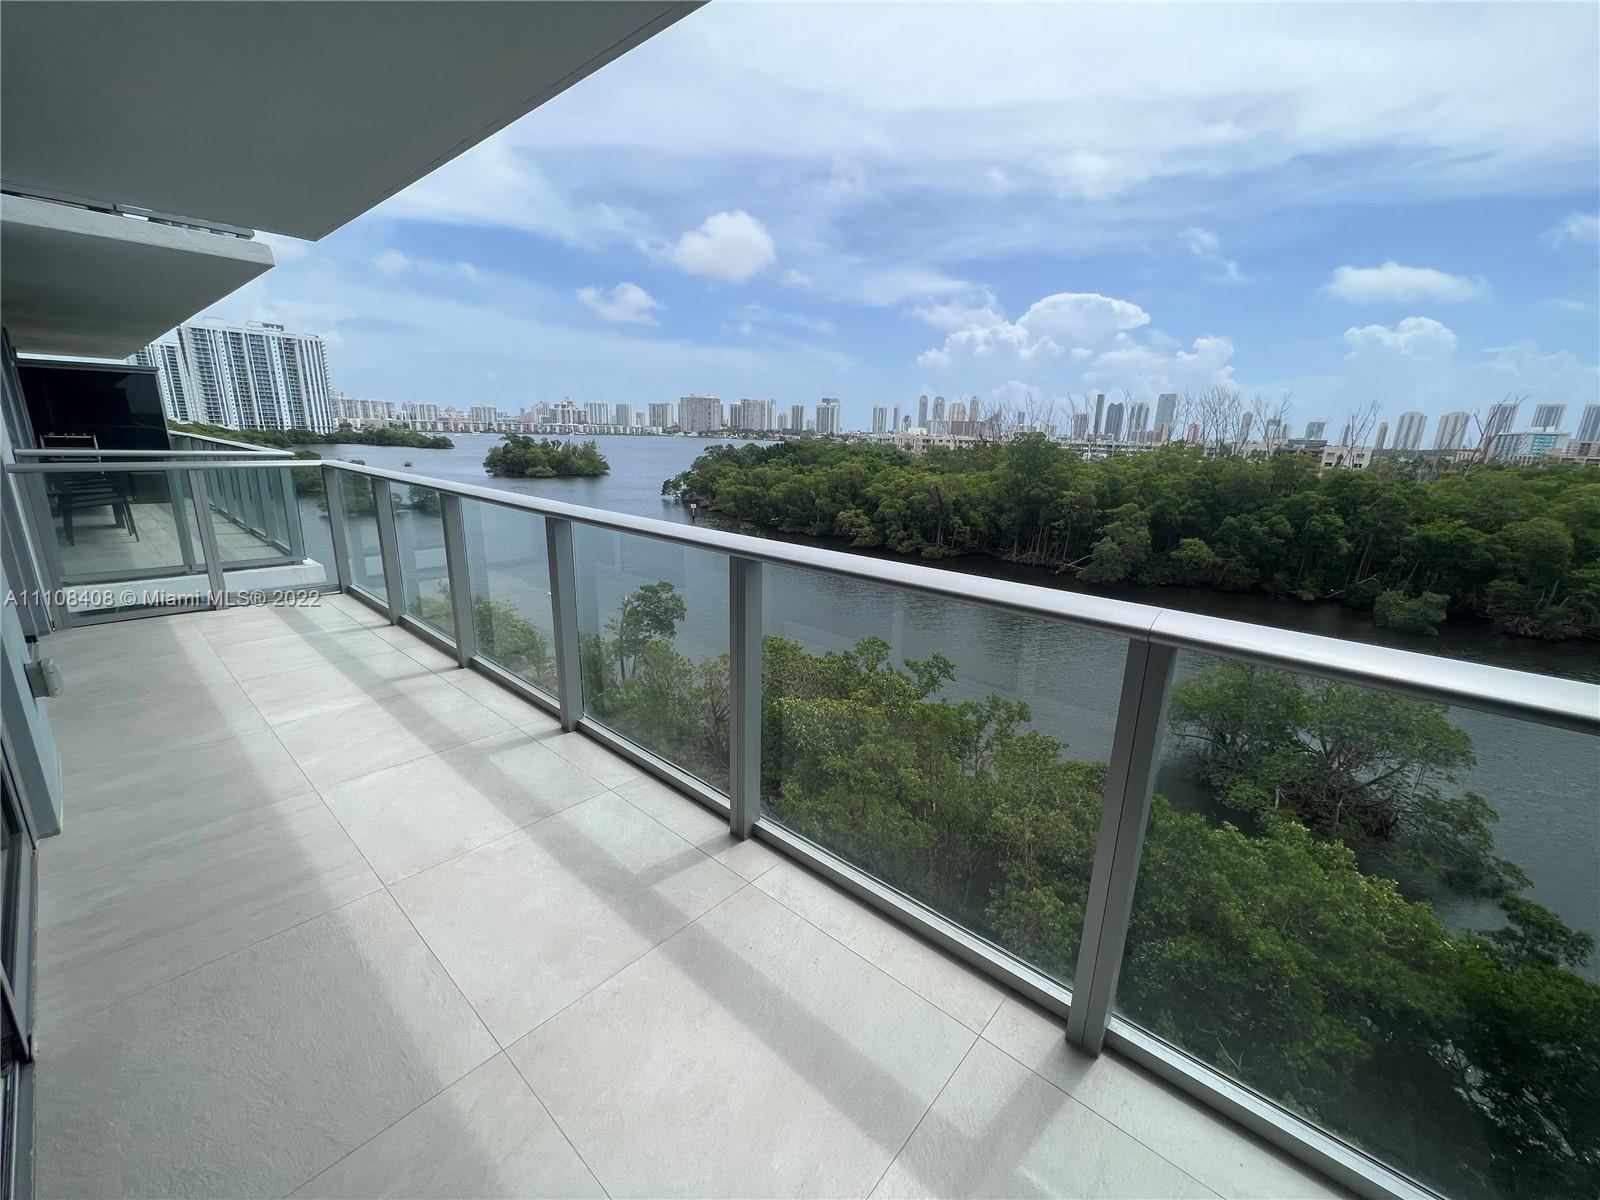 16385 Biscayne Blvd 617, North Miami Beach, Florida 33160, 2 Bedrooms Bedrooms, ,2 BathroomsBathrooms,Residential,For Sale,16385 Biscayne Blvd 617,A11108408